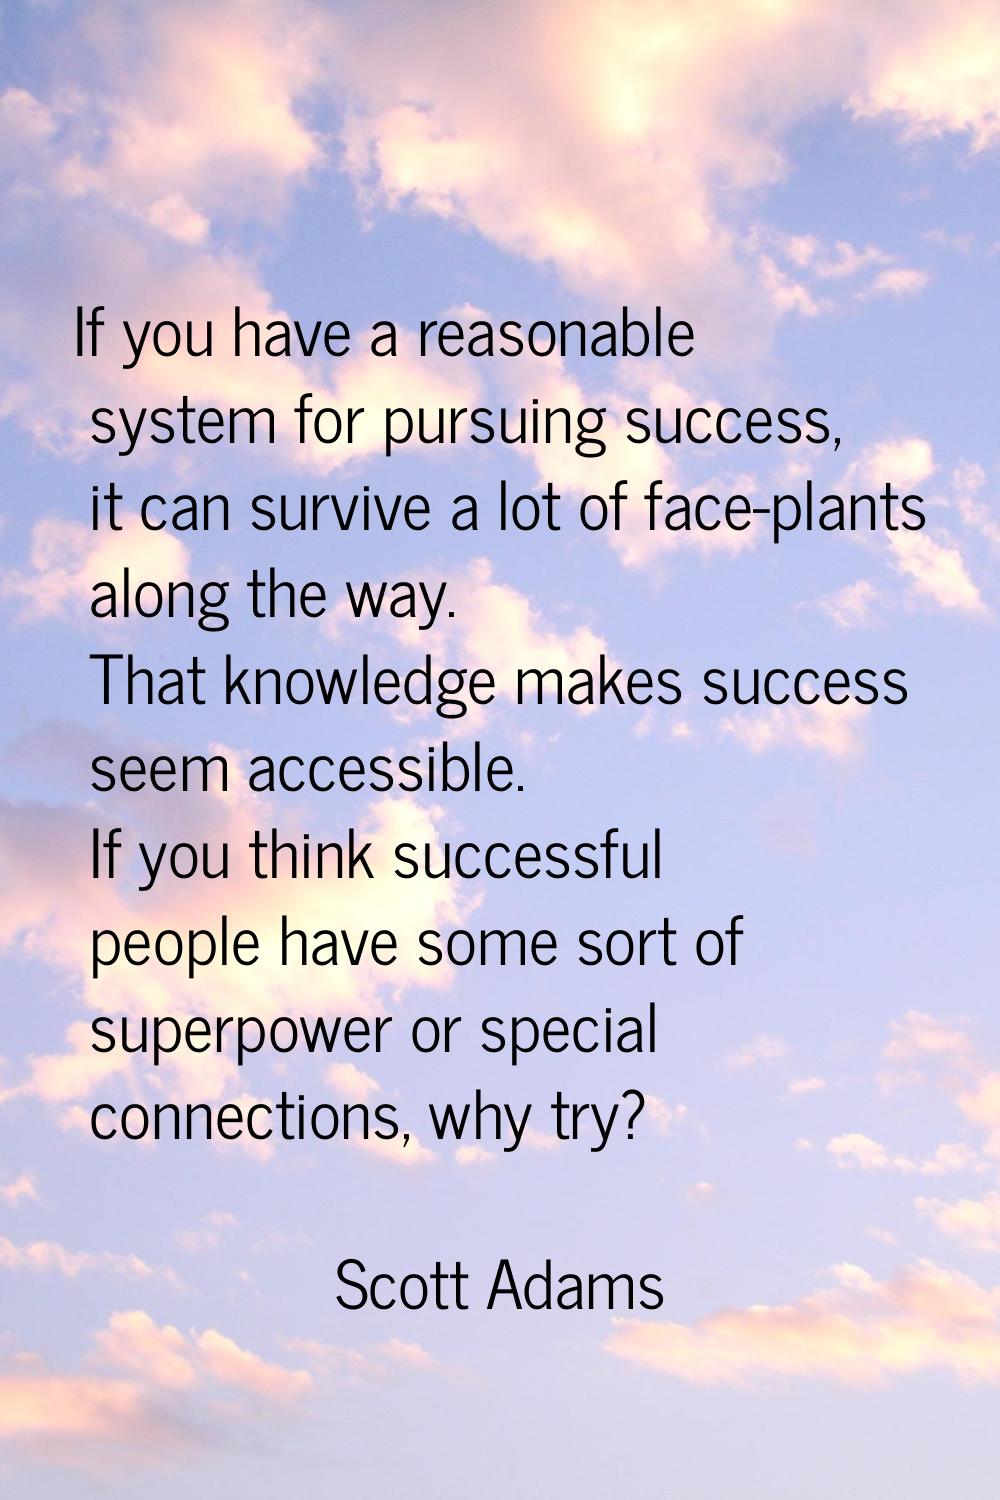 If you have a reasonable system for pursuing success, it can survive a lot of face-plants along the